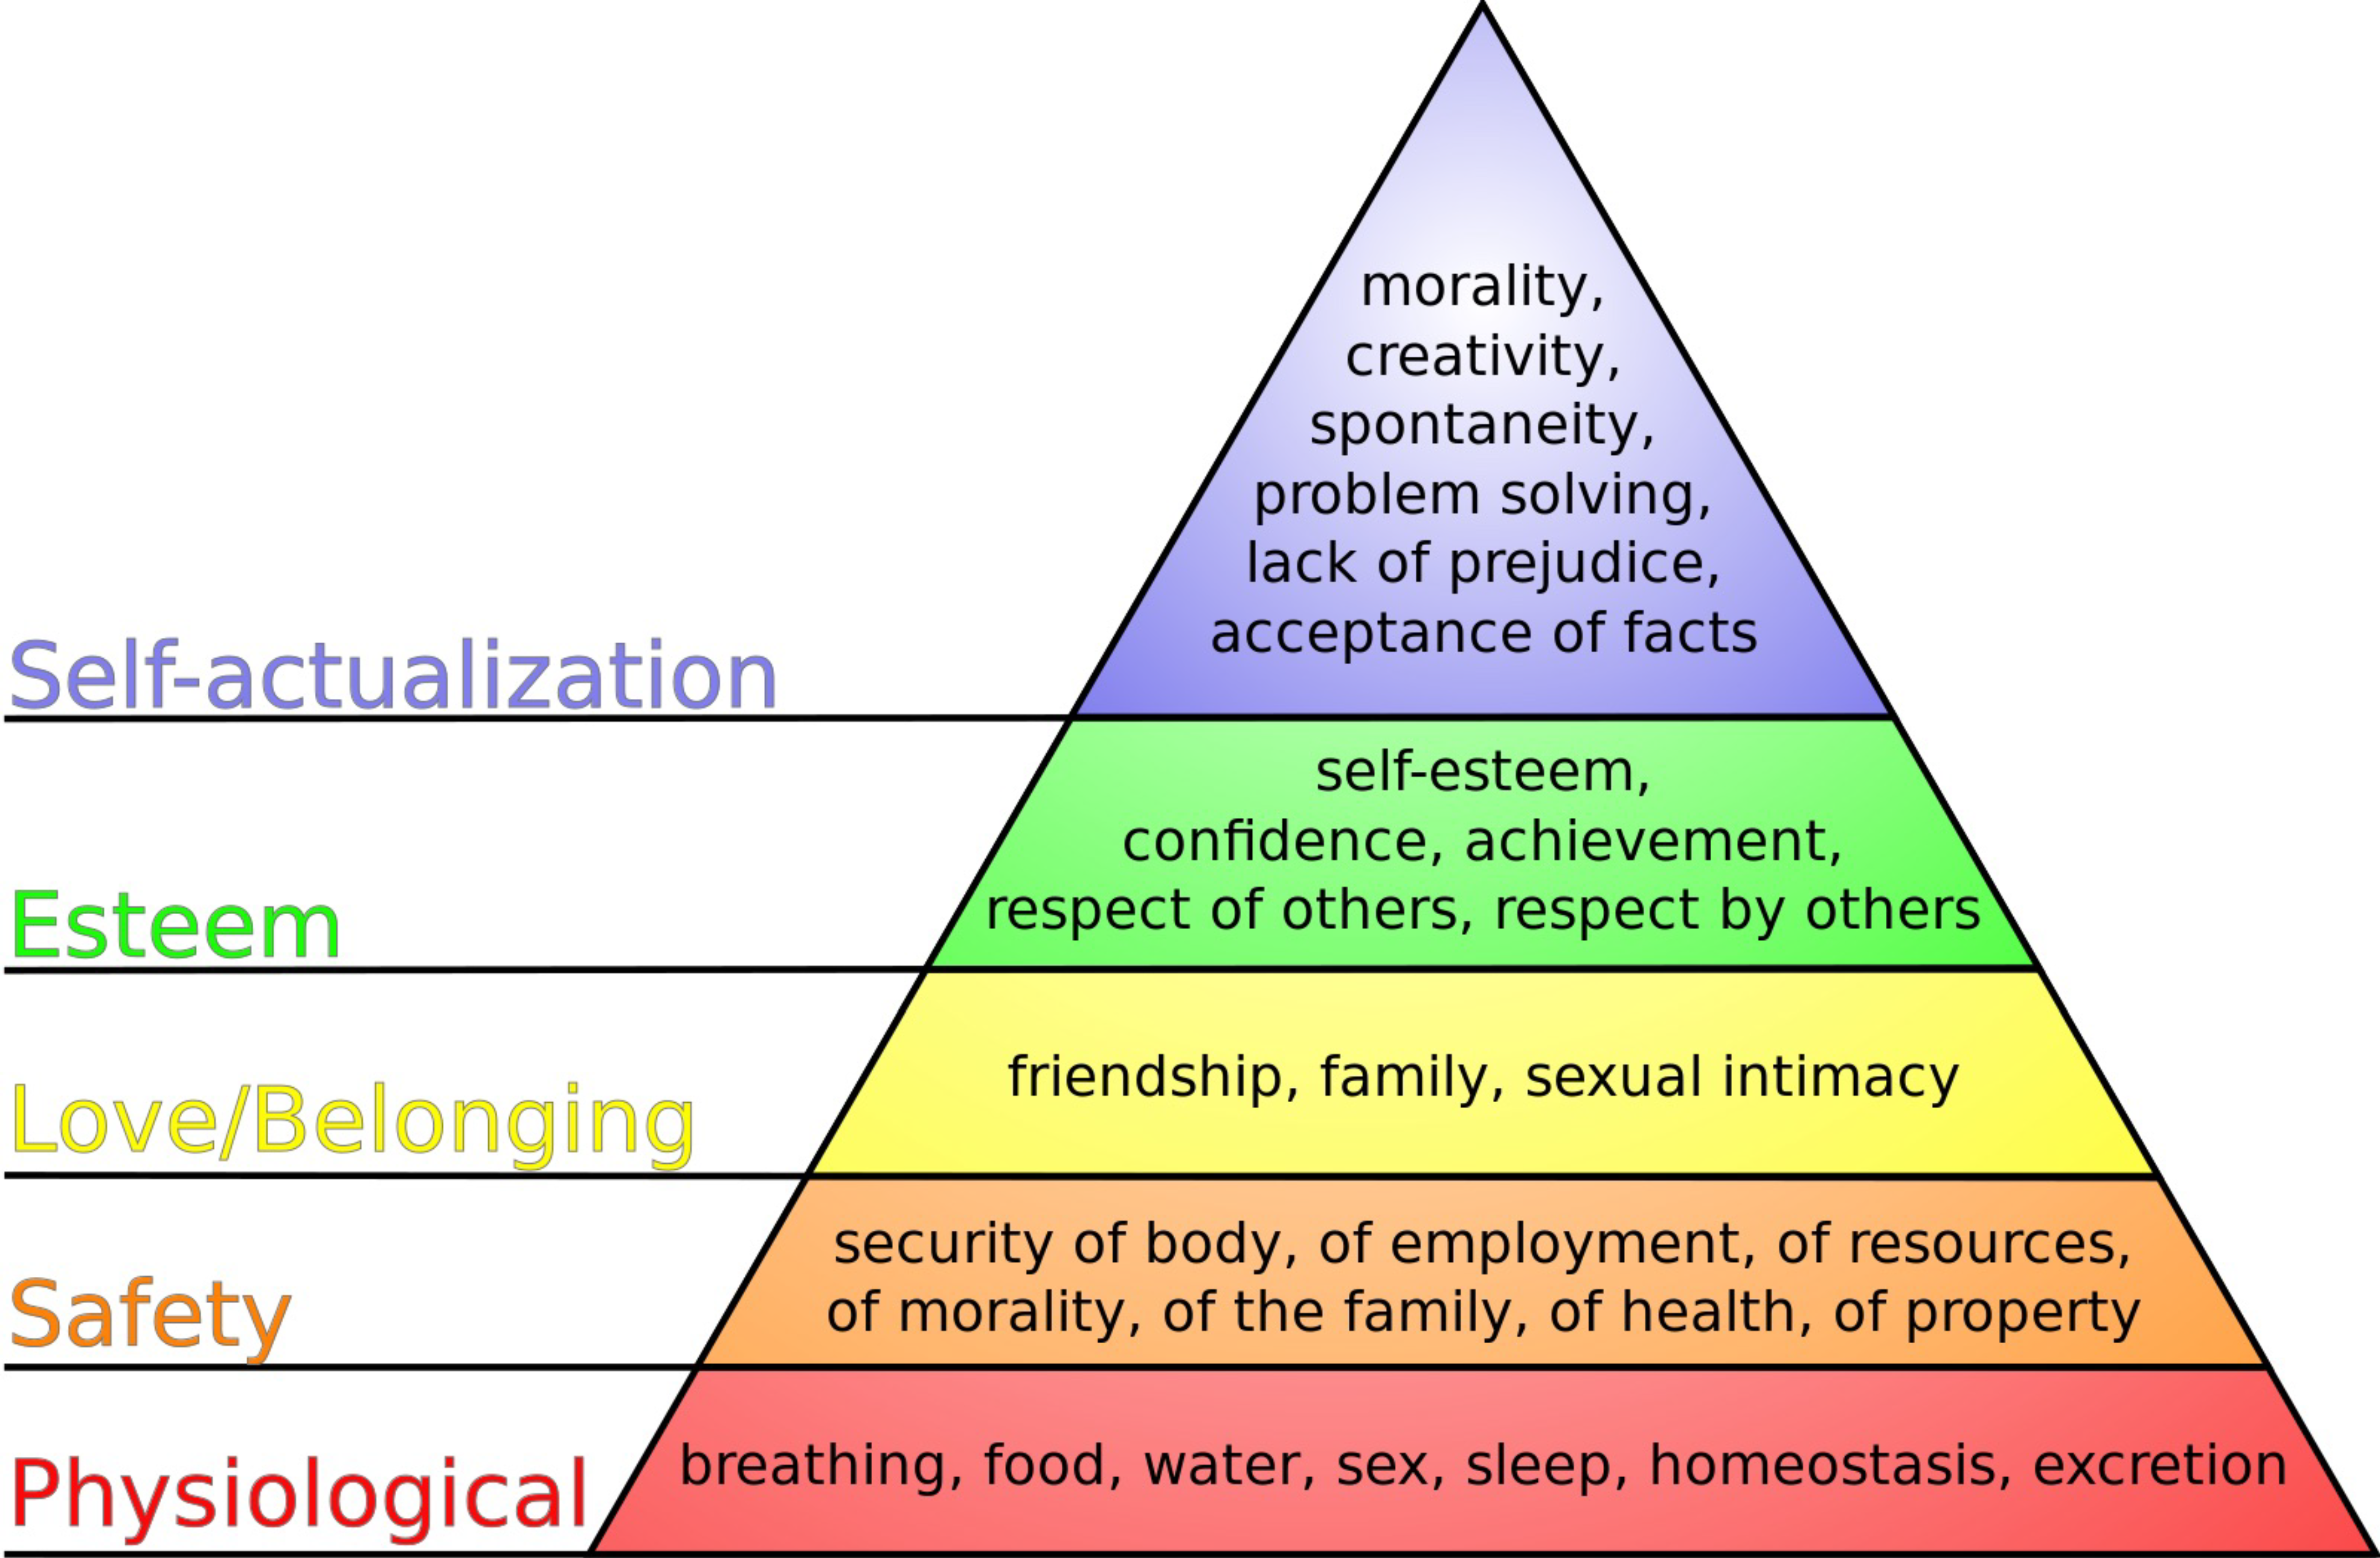 A pyramid with text in each of the layers. From top to bottom the layers are labeled: self-actualization, esteem, love, safety, and physiological needs. Source: Wikimedia Commons